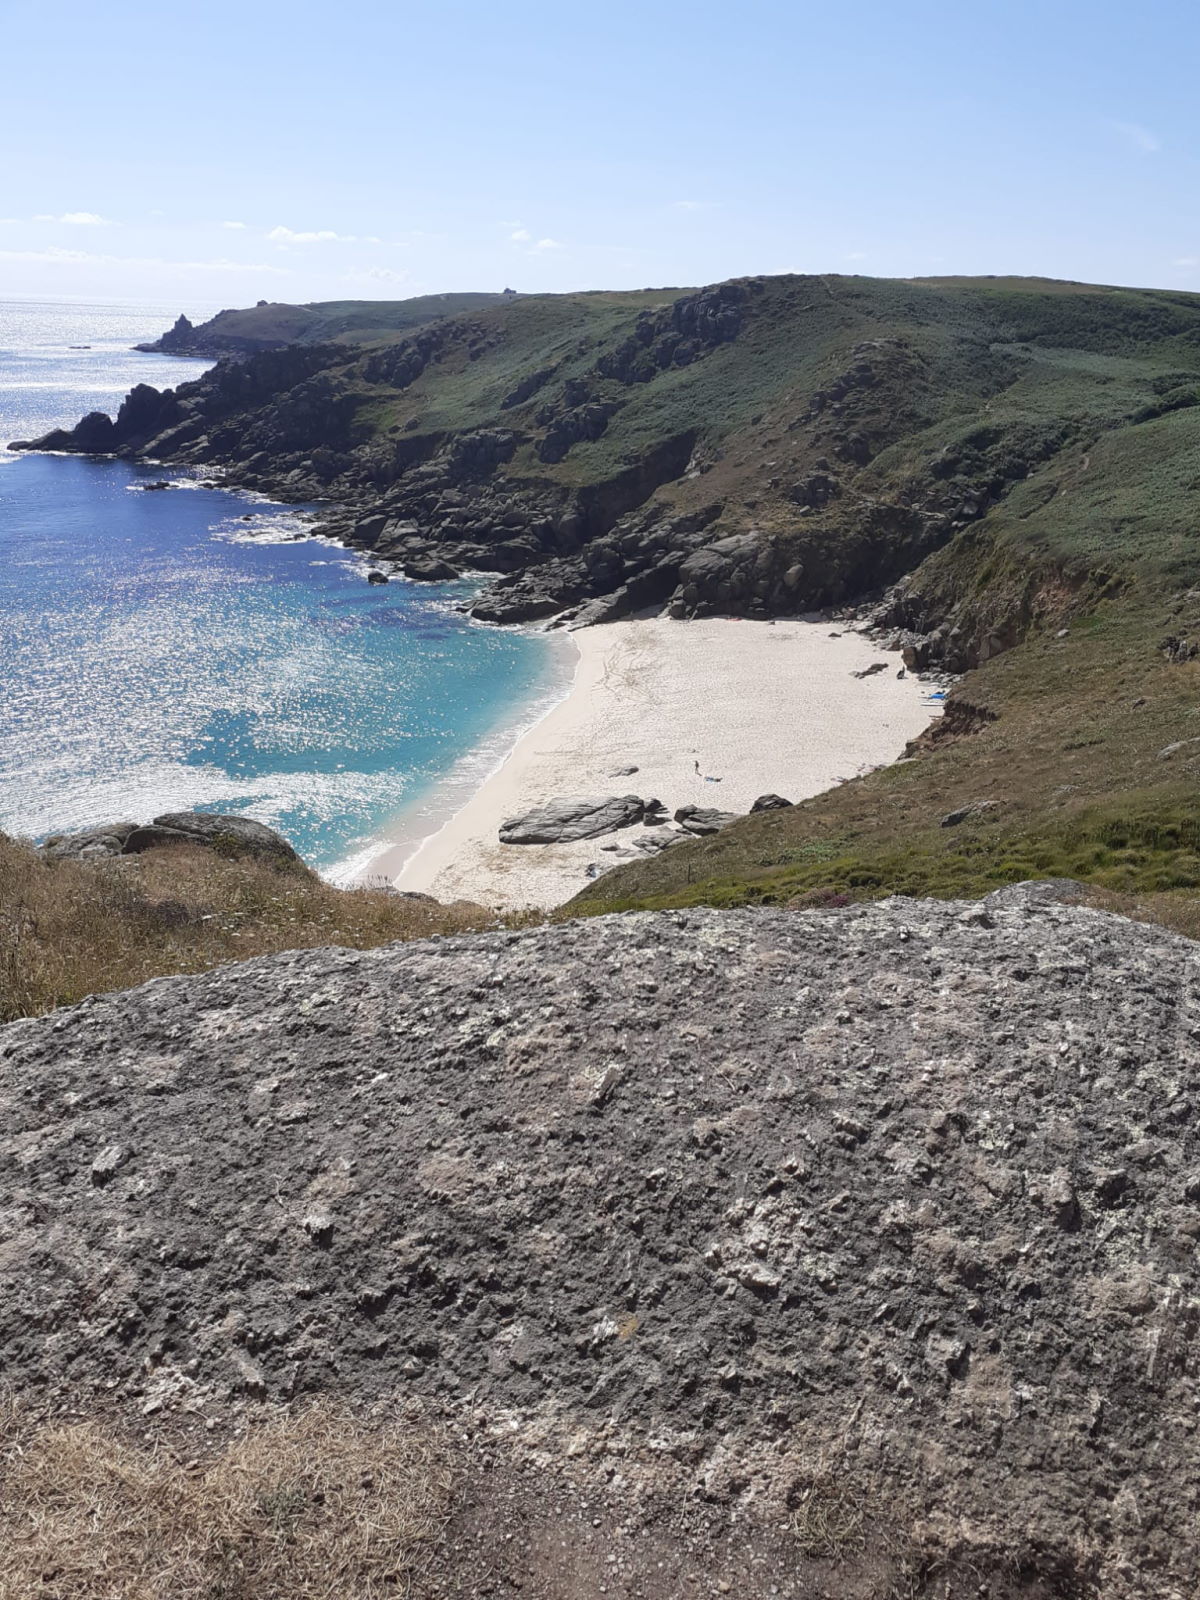 Views from The Haven, Porthcurno, Cornwall